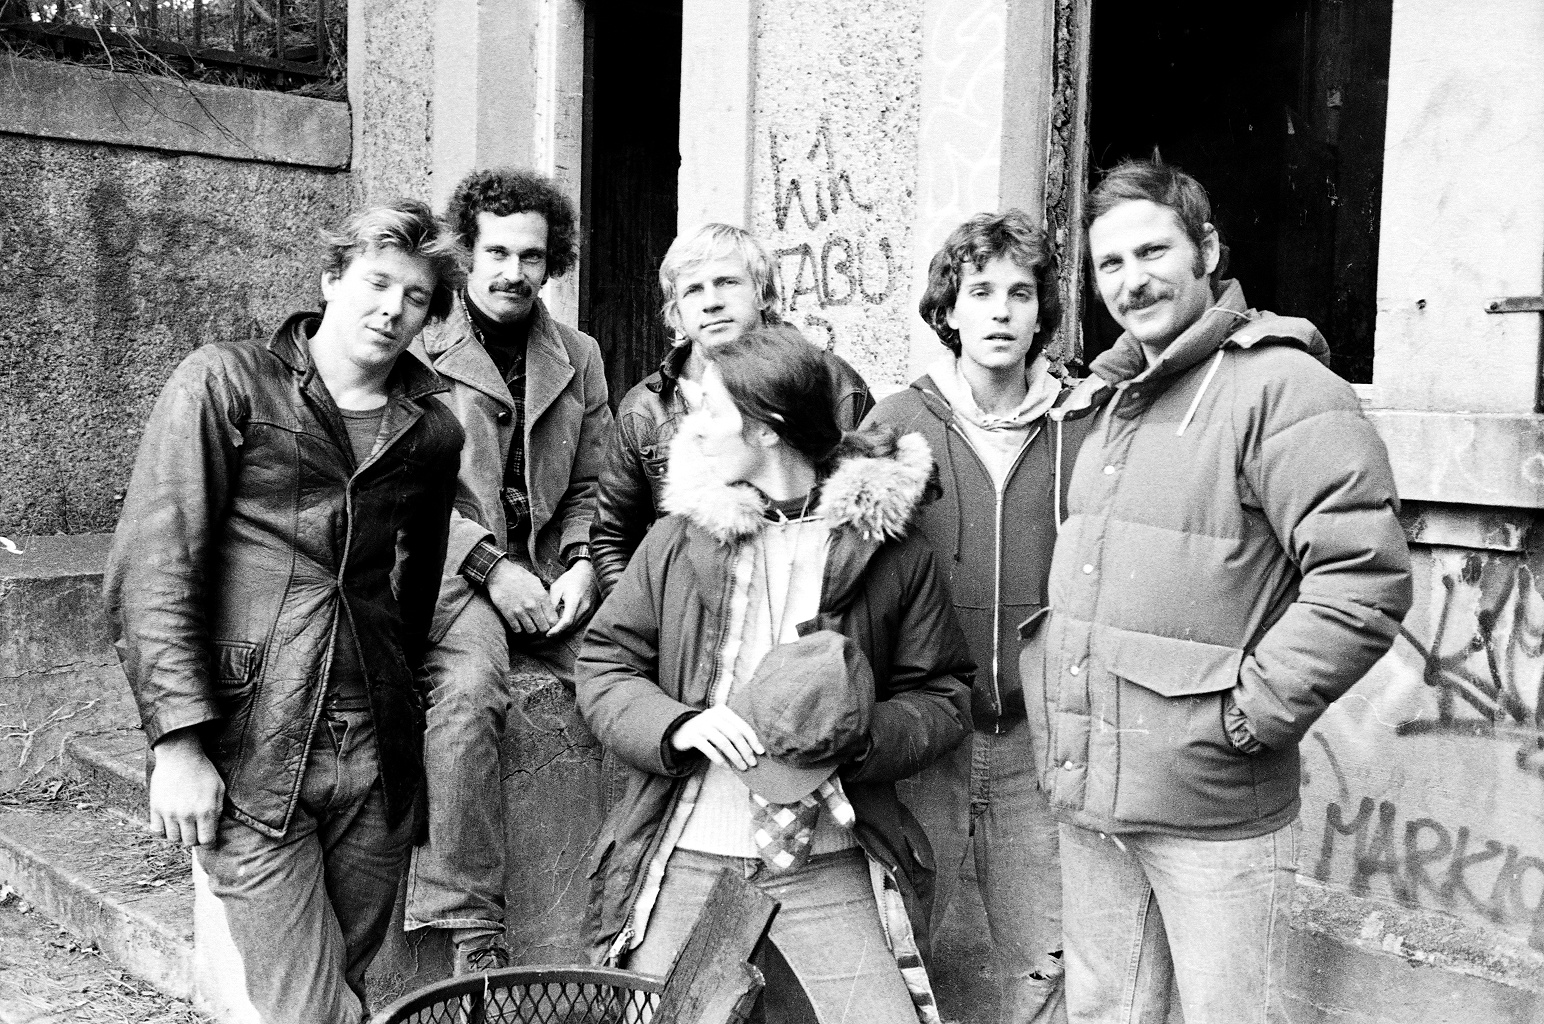 On location in the Bronx, New York during the making of William Reilly's NYU student film STREET WISE. Left to Right Mickey Rourke, Walter Vogt, Anatoly Davydov, Susan McBride and Joseph Dellolio